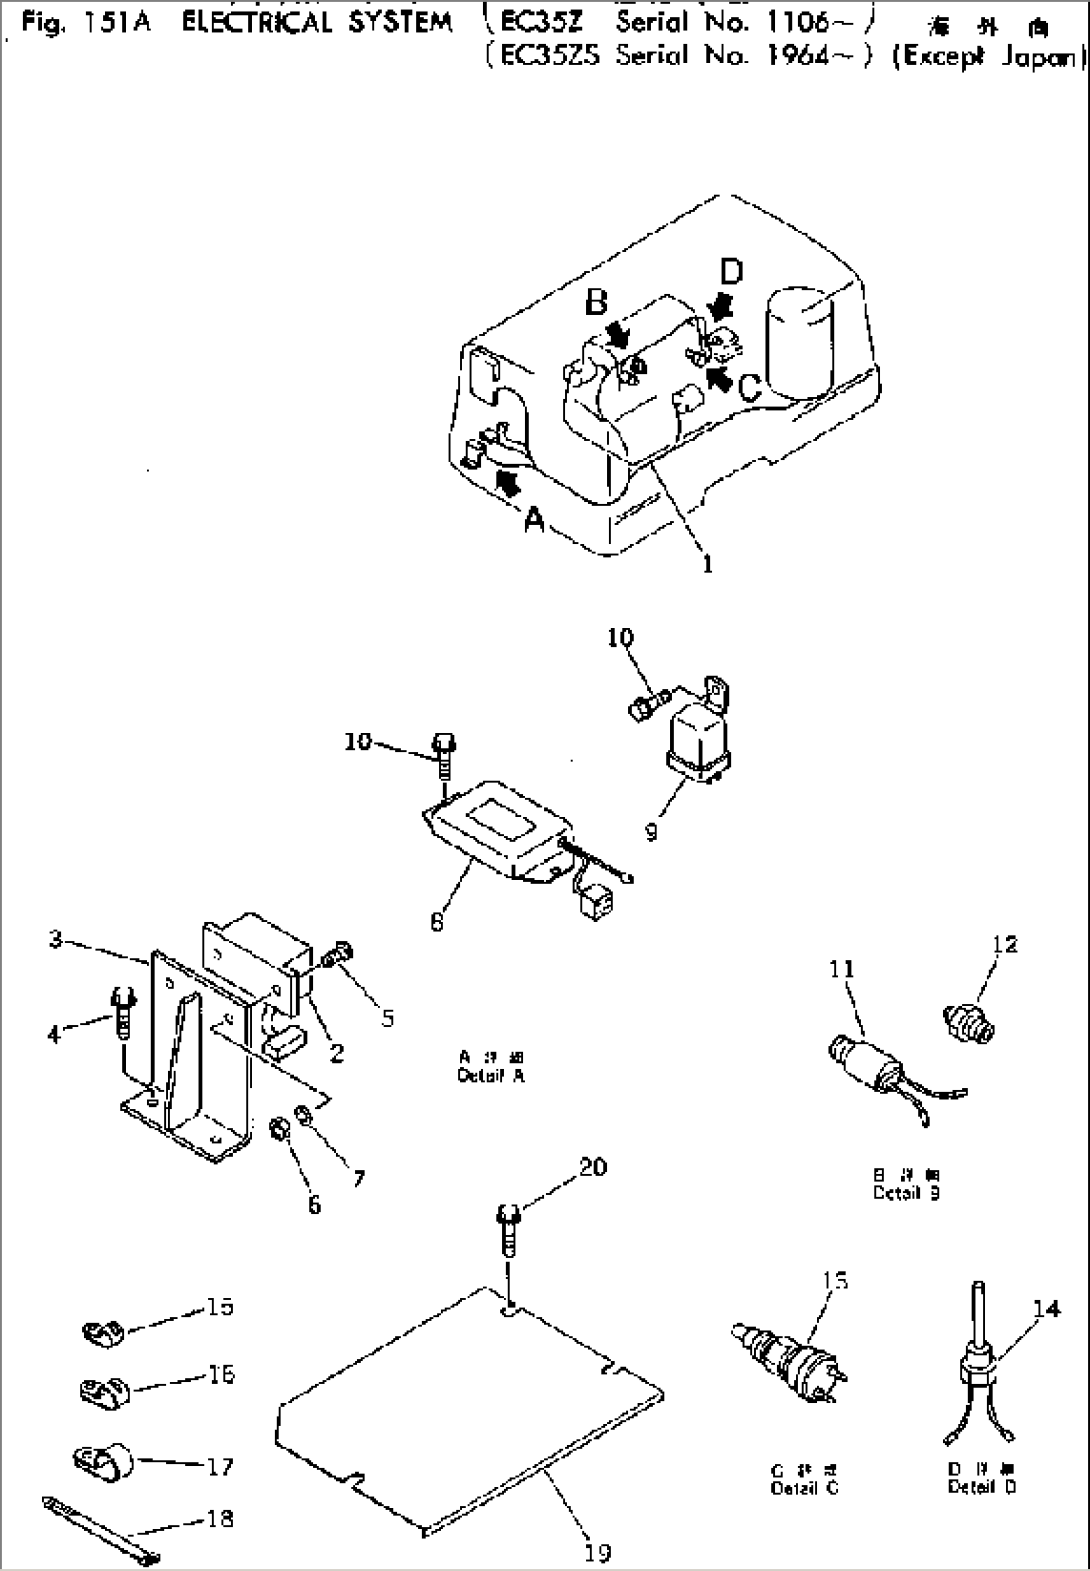 ELECTRICAL SYSTEM(#1106-)